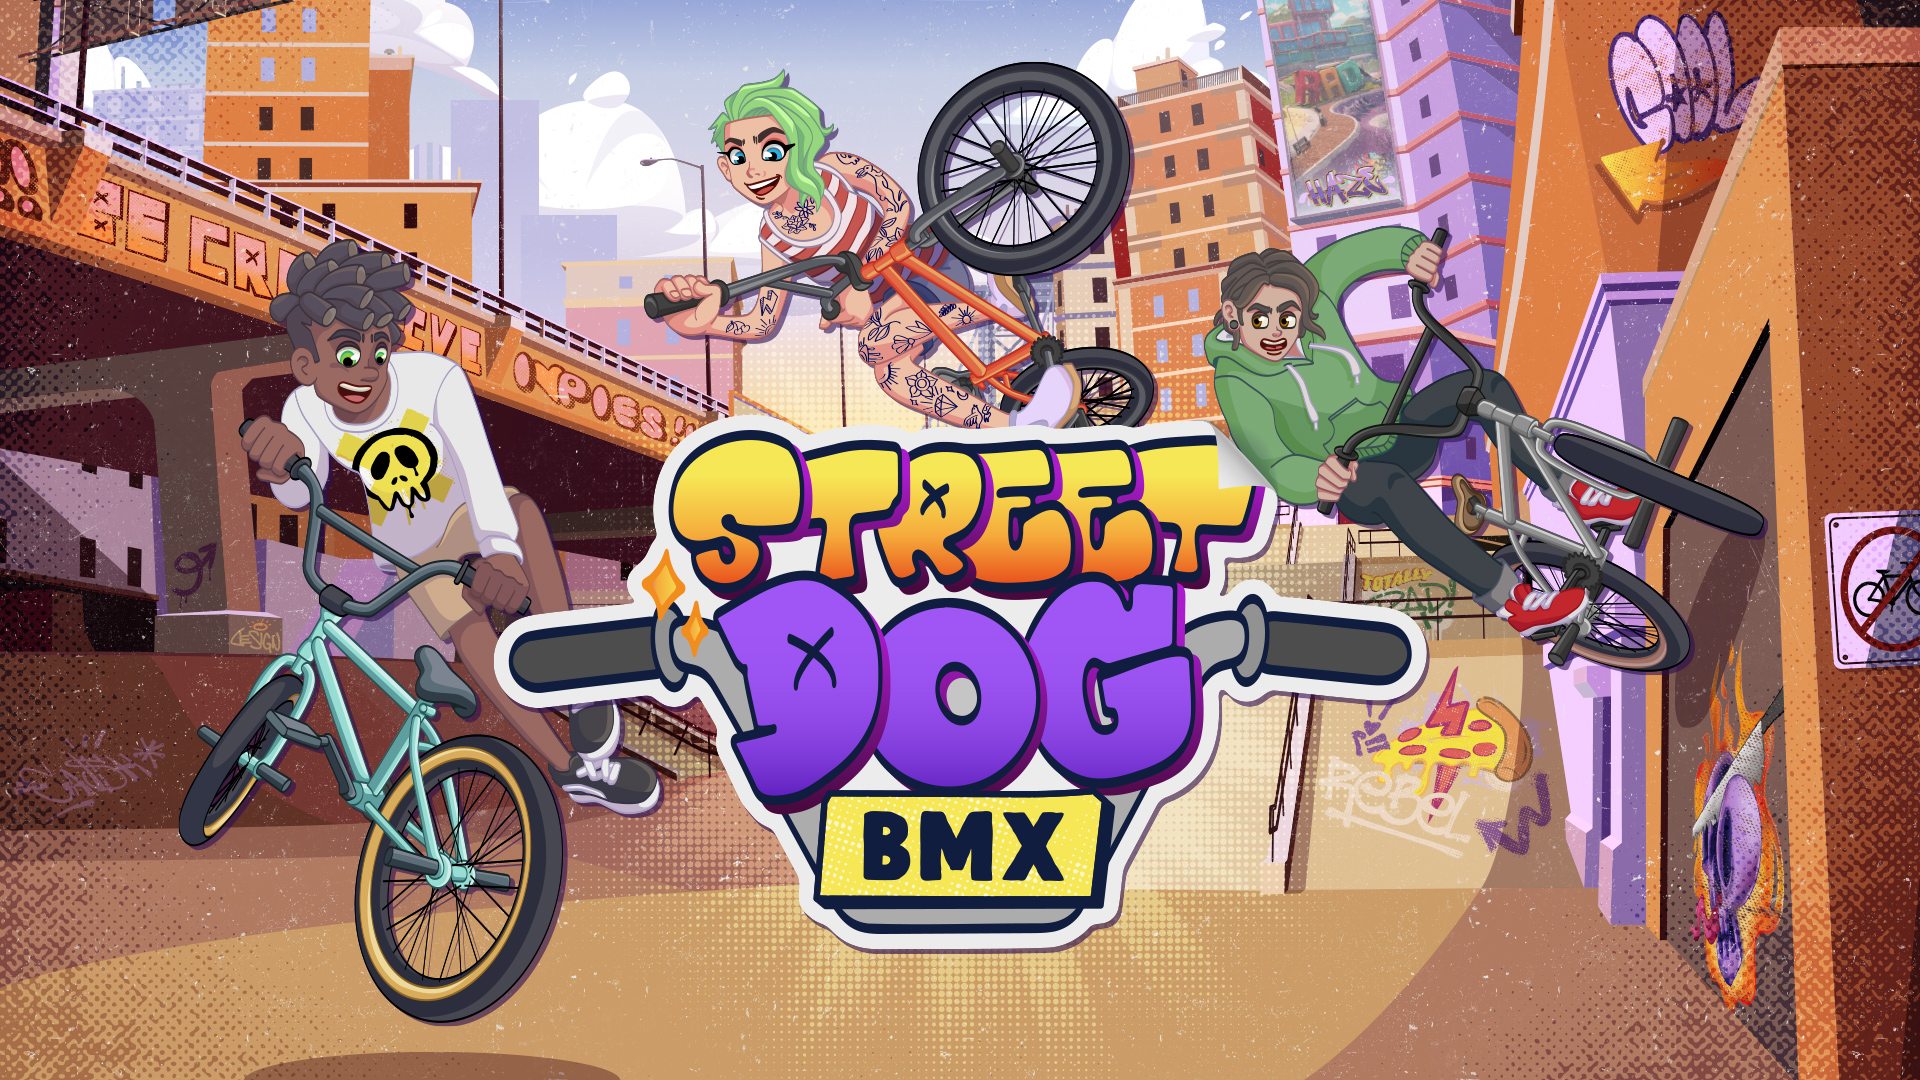 #
      Freestyle extreme sports game Streetdog BMX announced for PC